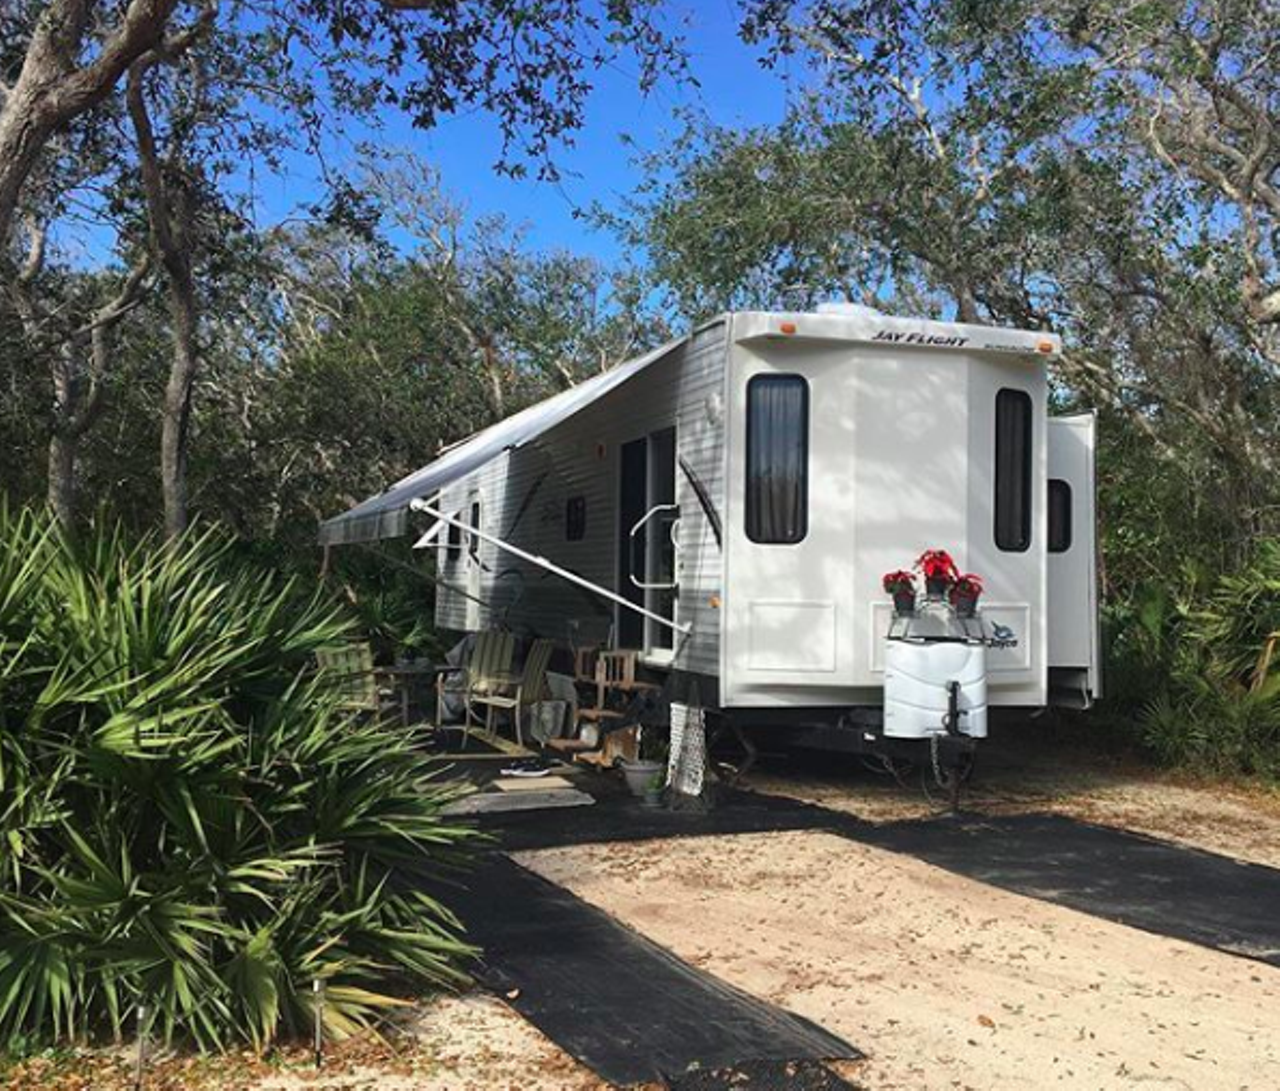 North Beach Camp Resort
4125 Coastal Highway (A1A), St. Augustine, FL 32084 | 904-824-1806
This campsite isn&#146;t as primitive as some, so campers can enjoy all the amenities they want and make it to downtown St. Augustine for a drink before turning in for the night. 
Photo via North Beach Camp/Instagram